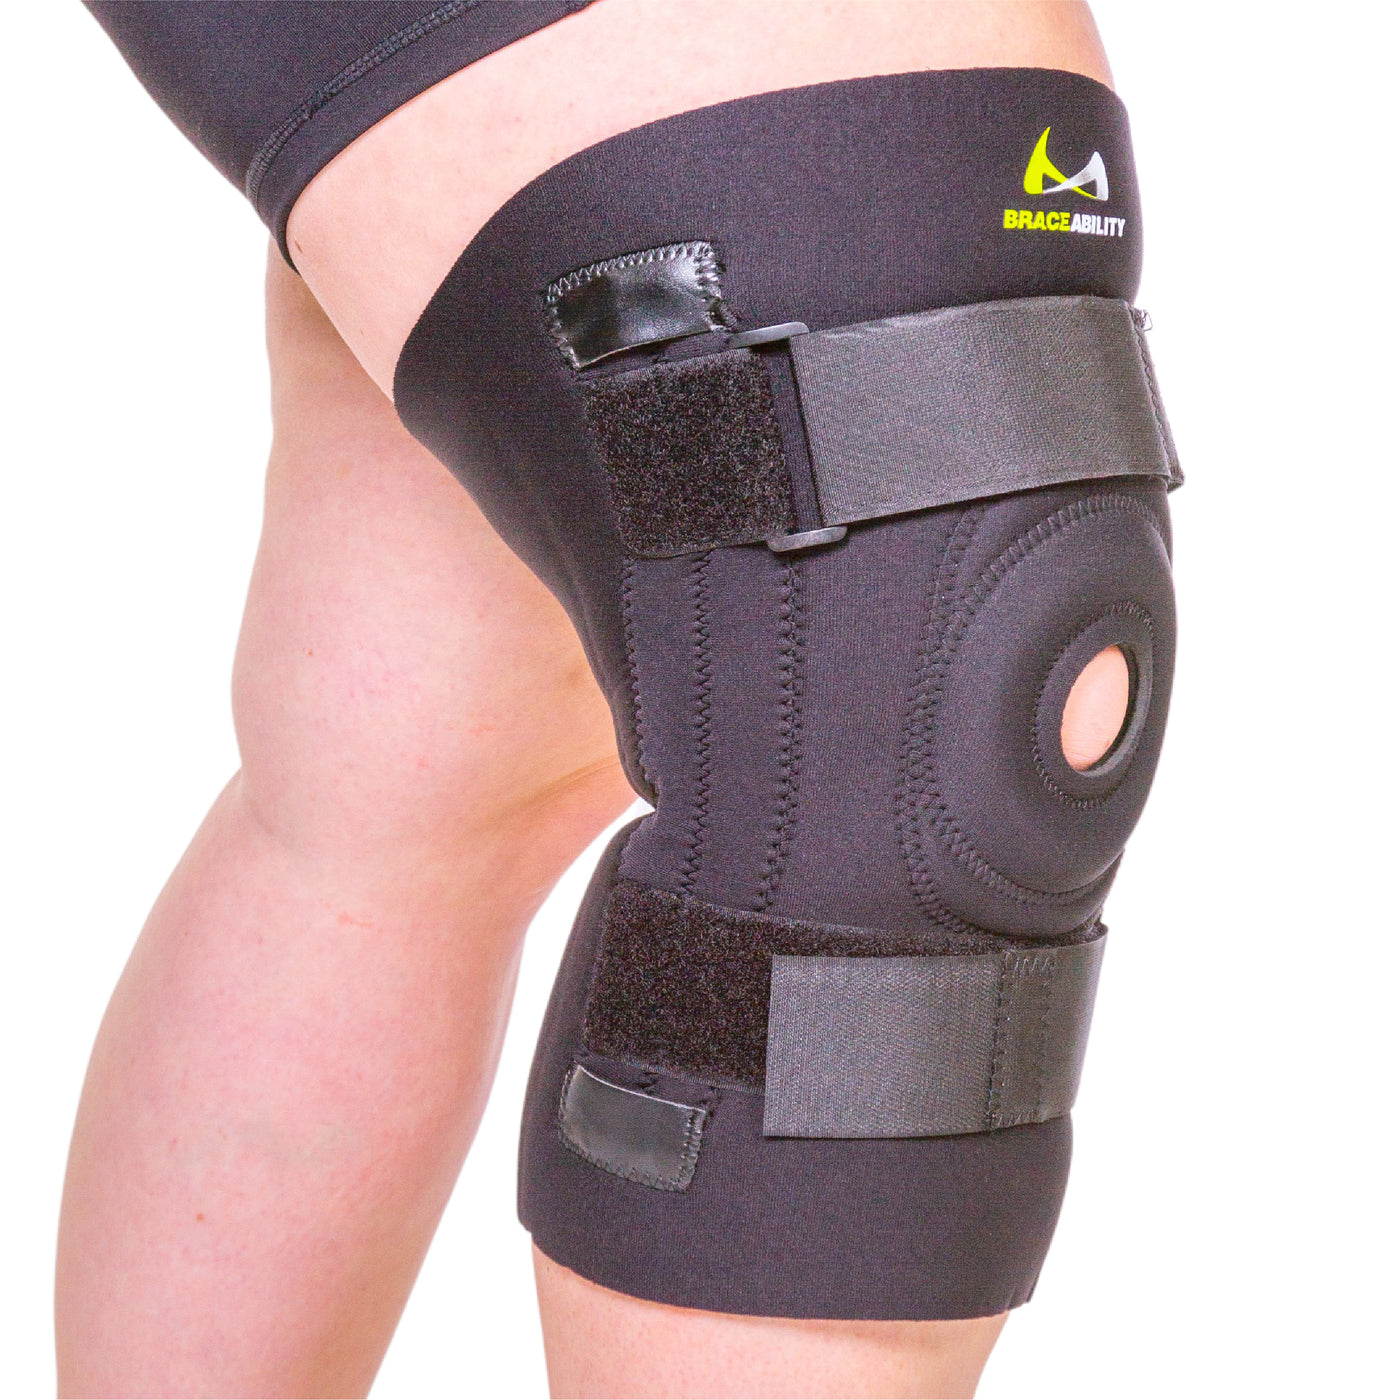 Young Woman Wearing An Adjustable Leg Brace To Support And